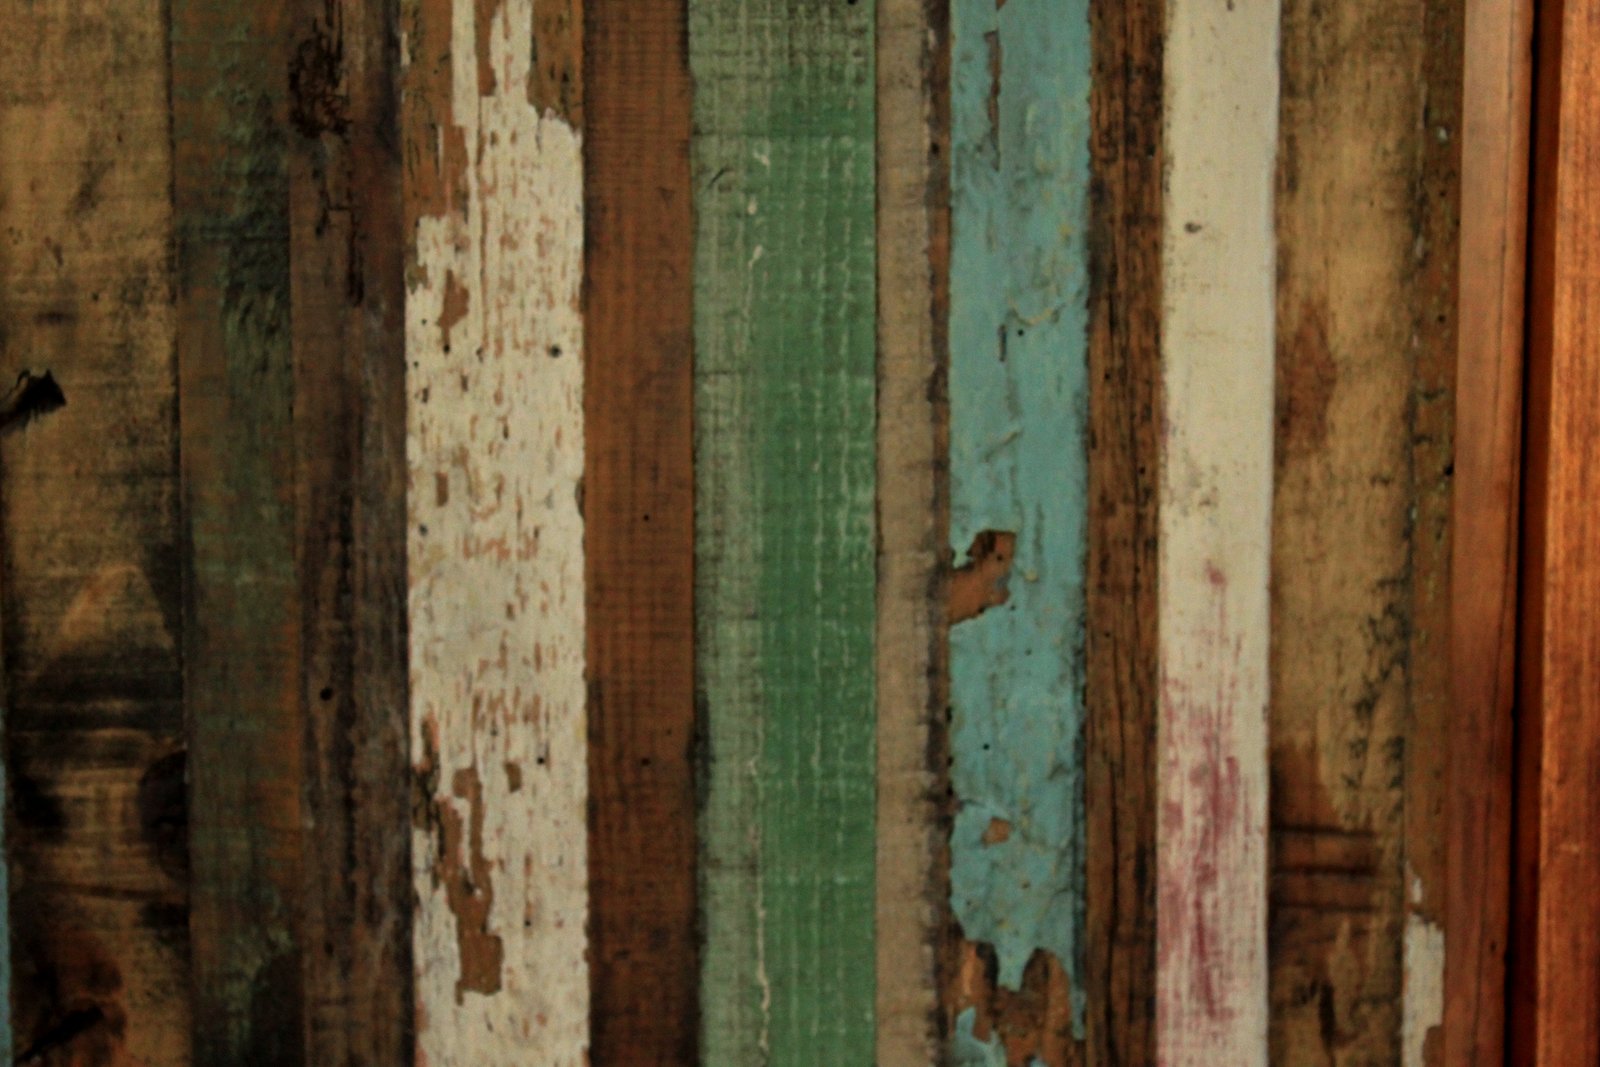 Texture Rustic Wood By Pomis On DeviantART Art